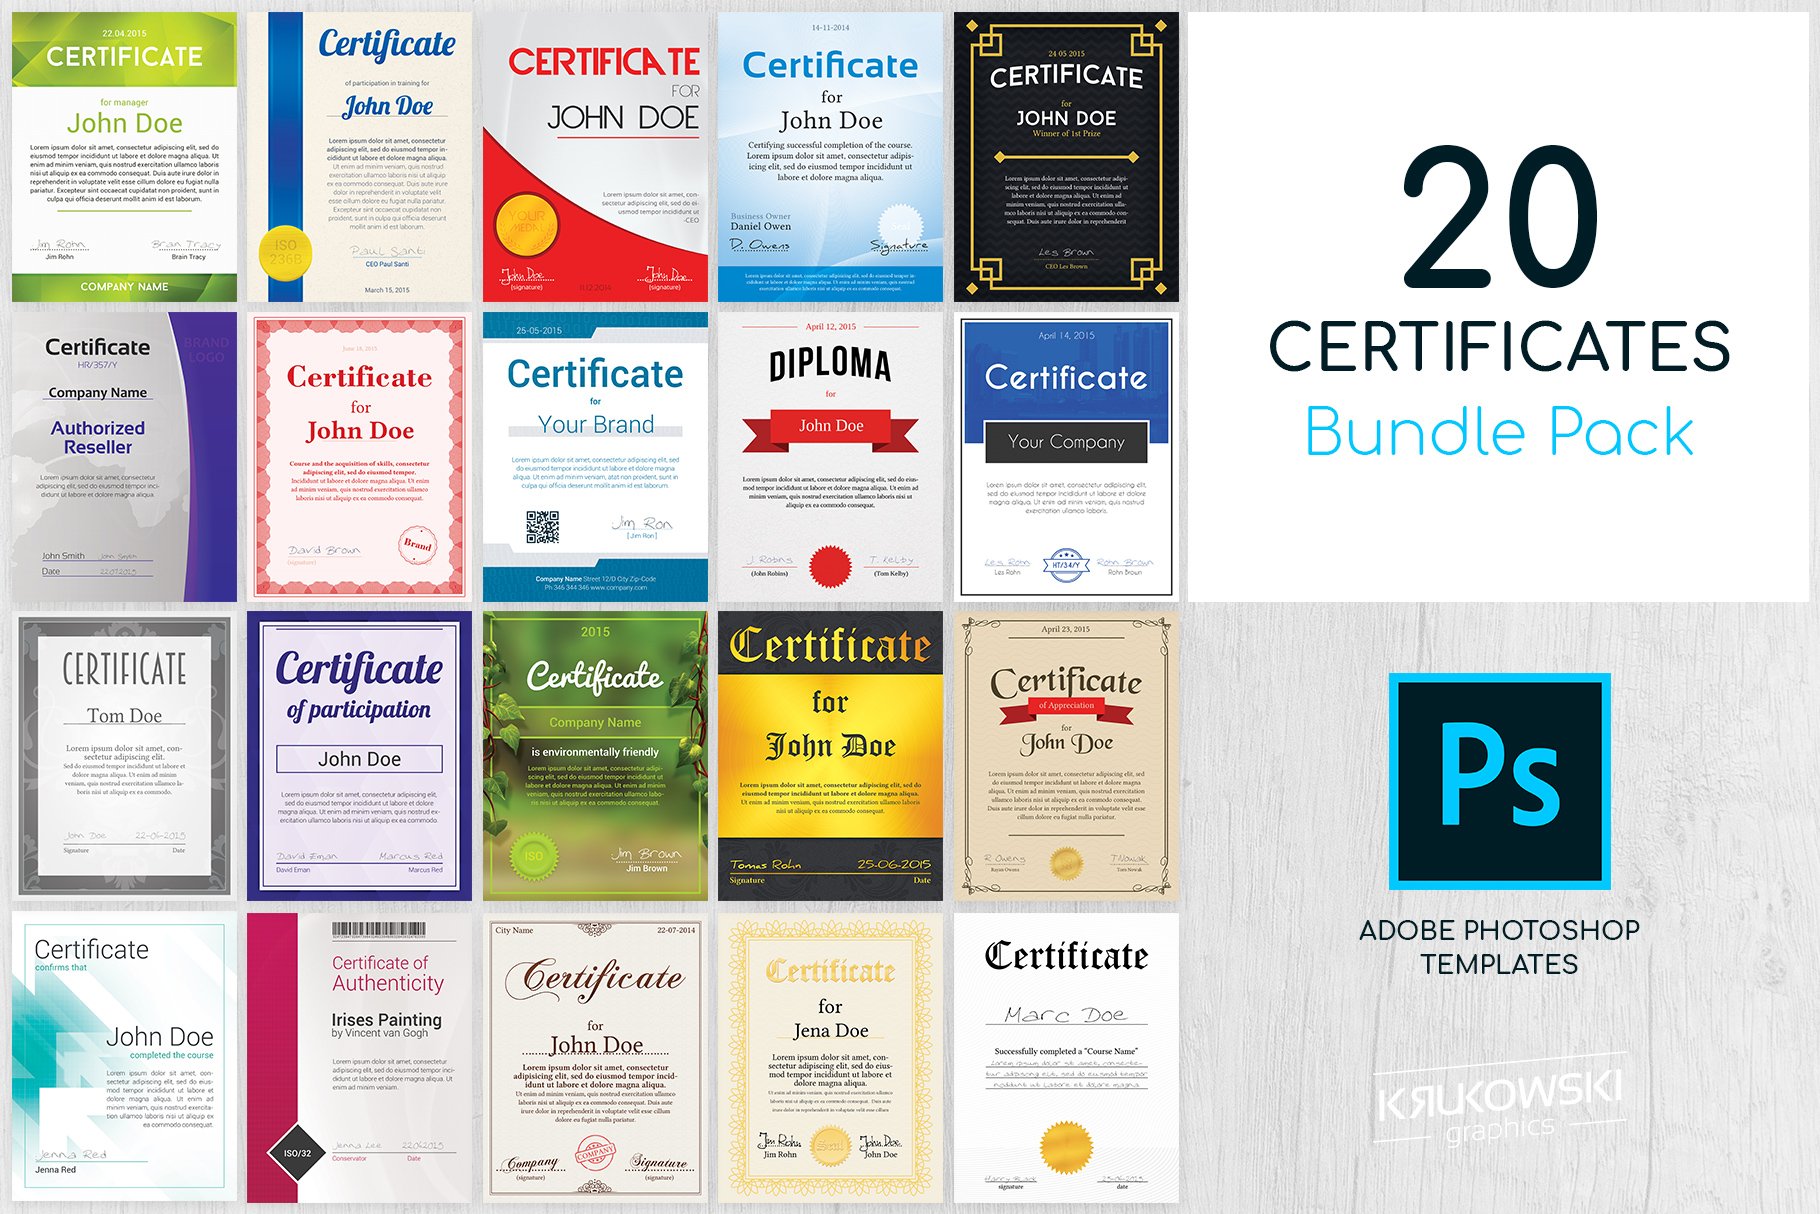 20 Certificate Templates Pack cover image.